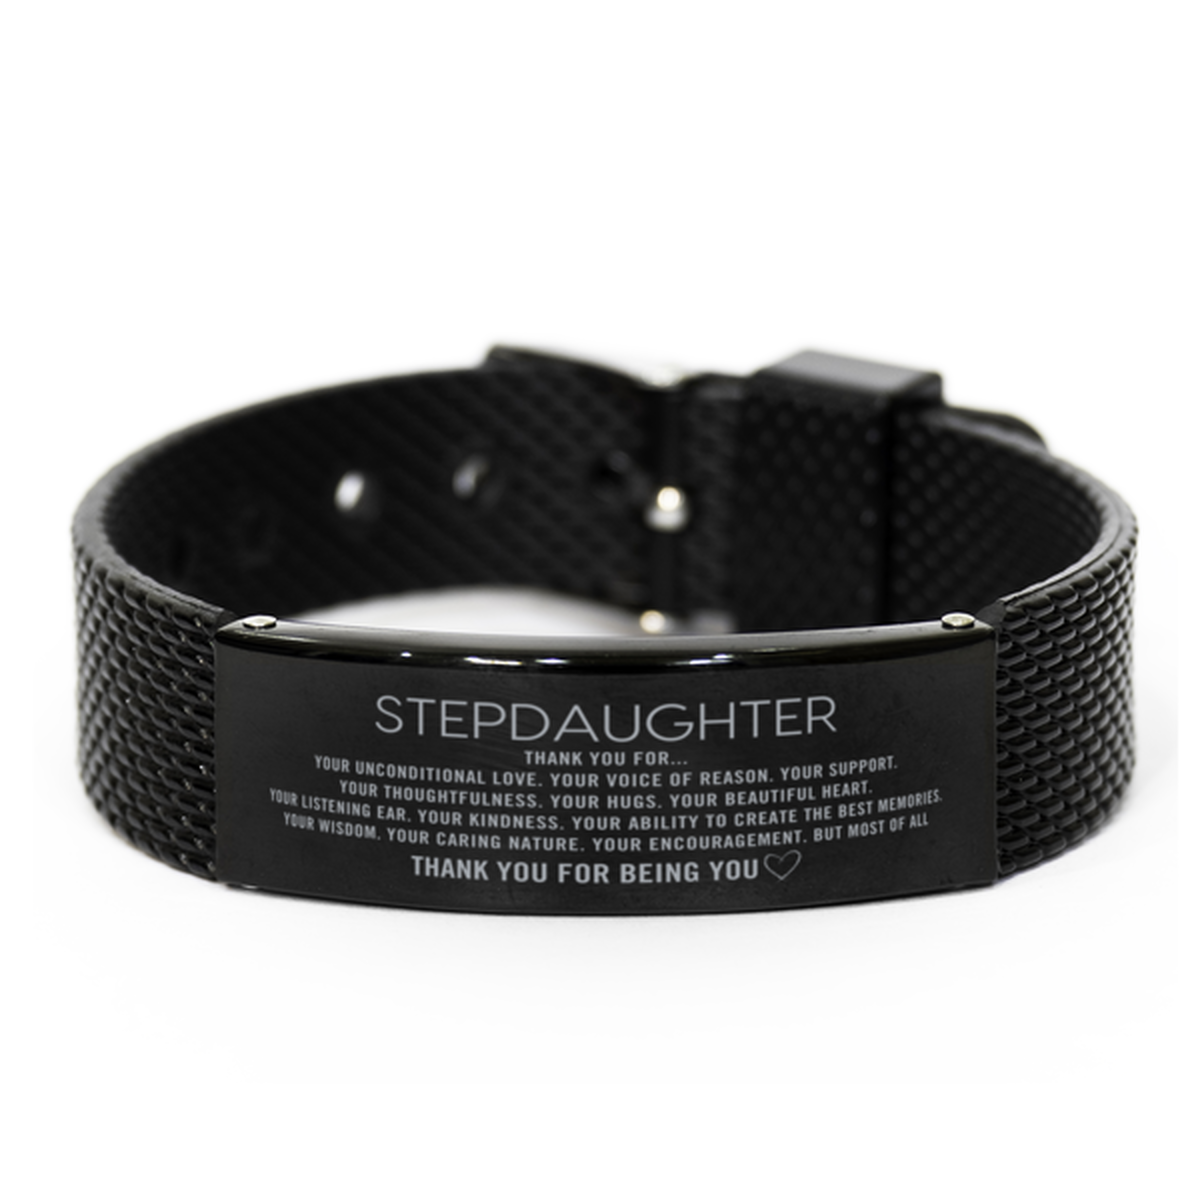 Stepdaughter Black Shark Mesh Bracelet Custom, Engraved Gifts For Stepdaughter Christmas Graduation Birthday Gifts for Men Women Stepdaughter Thank you for Your unconditional love